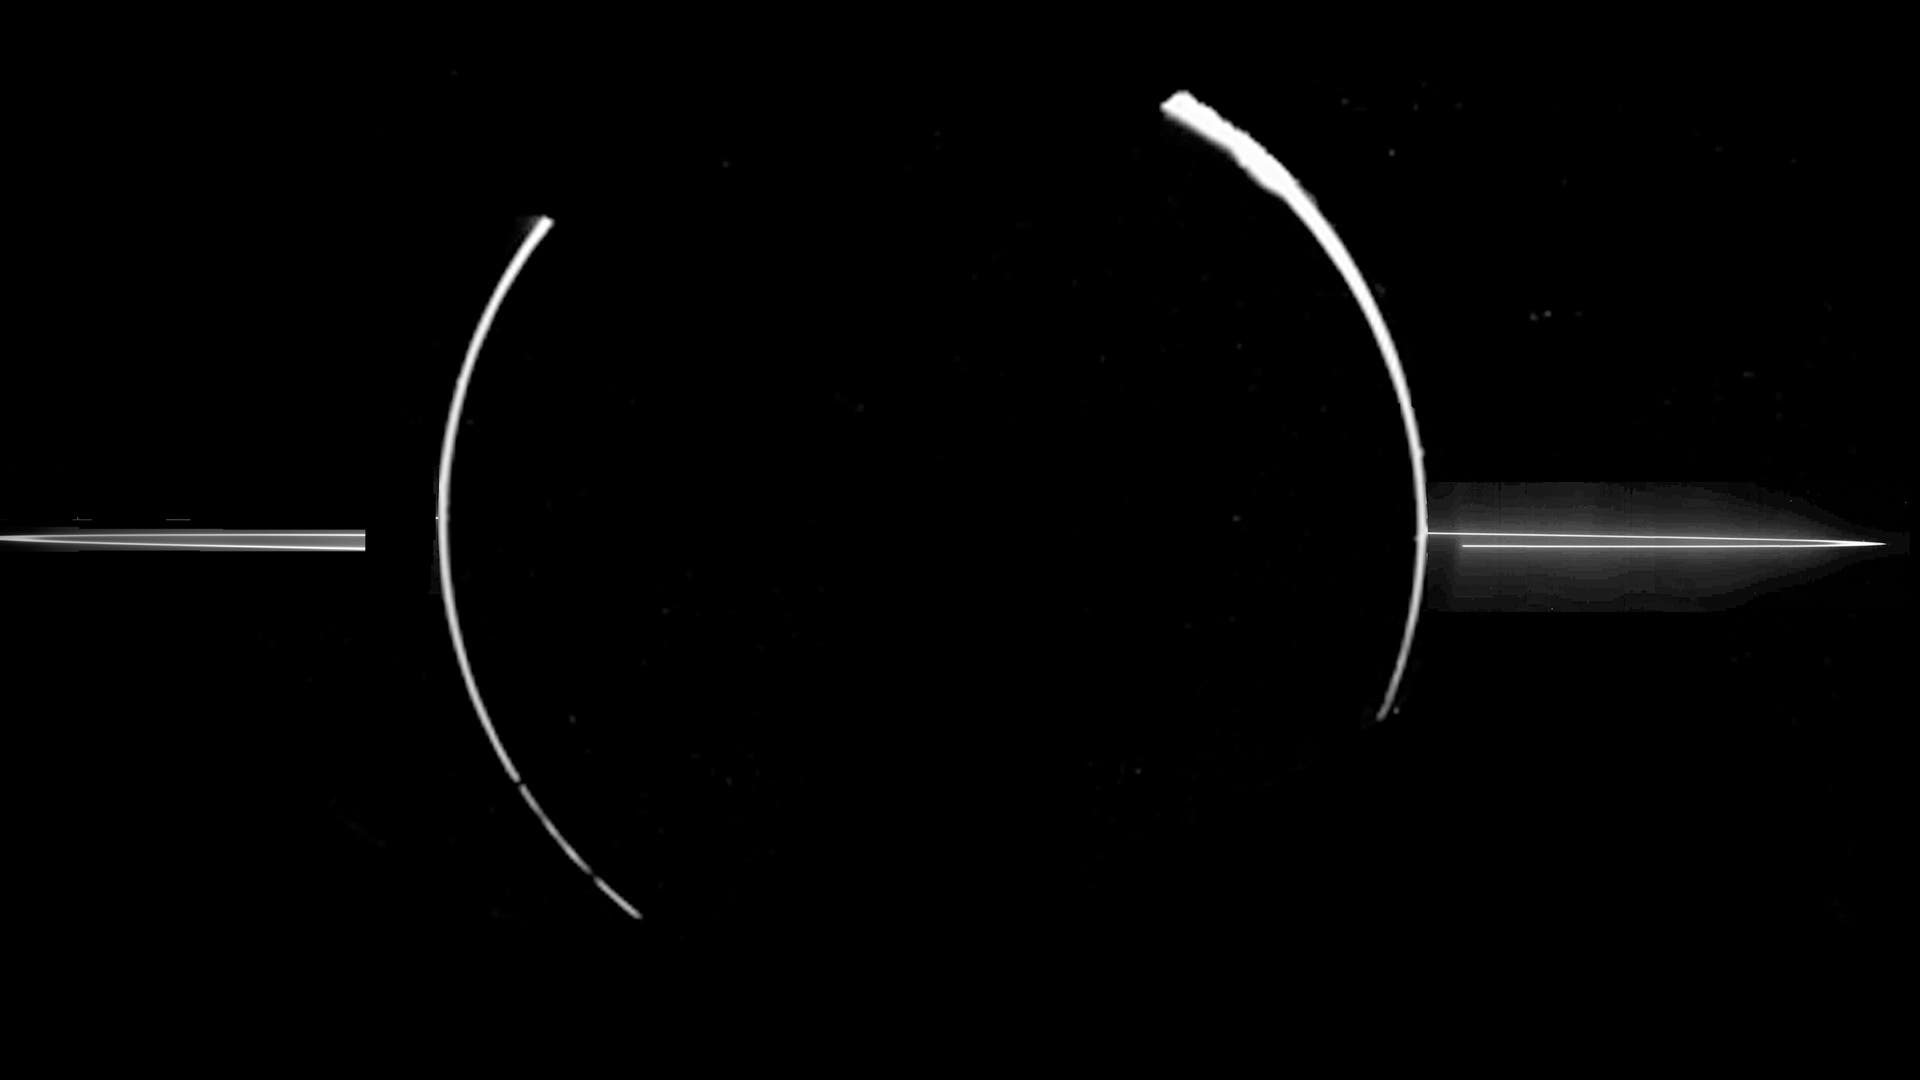 Planets: That's why Jupiter has such faint rings